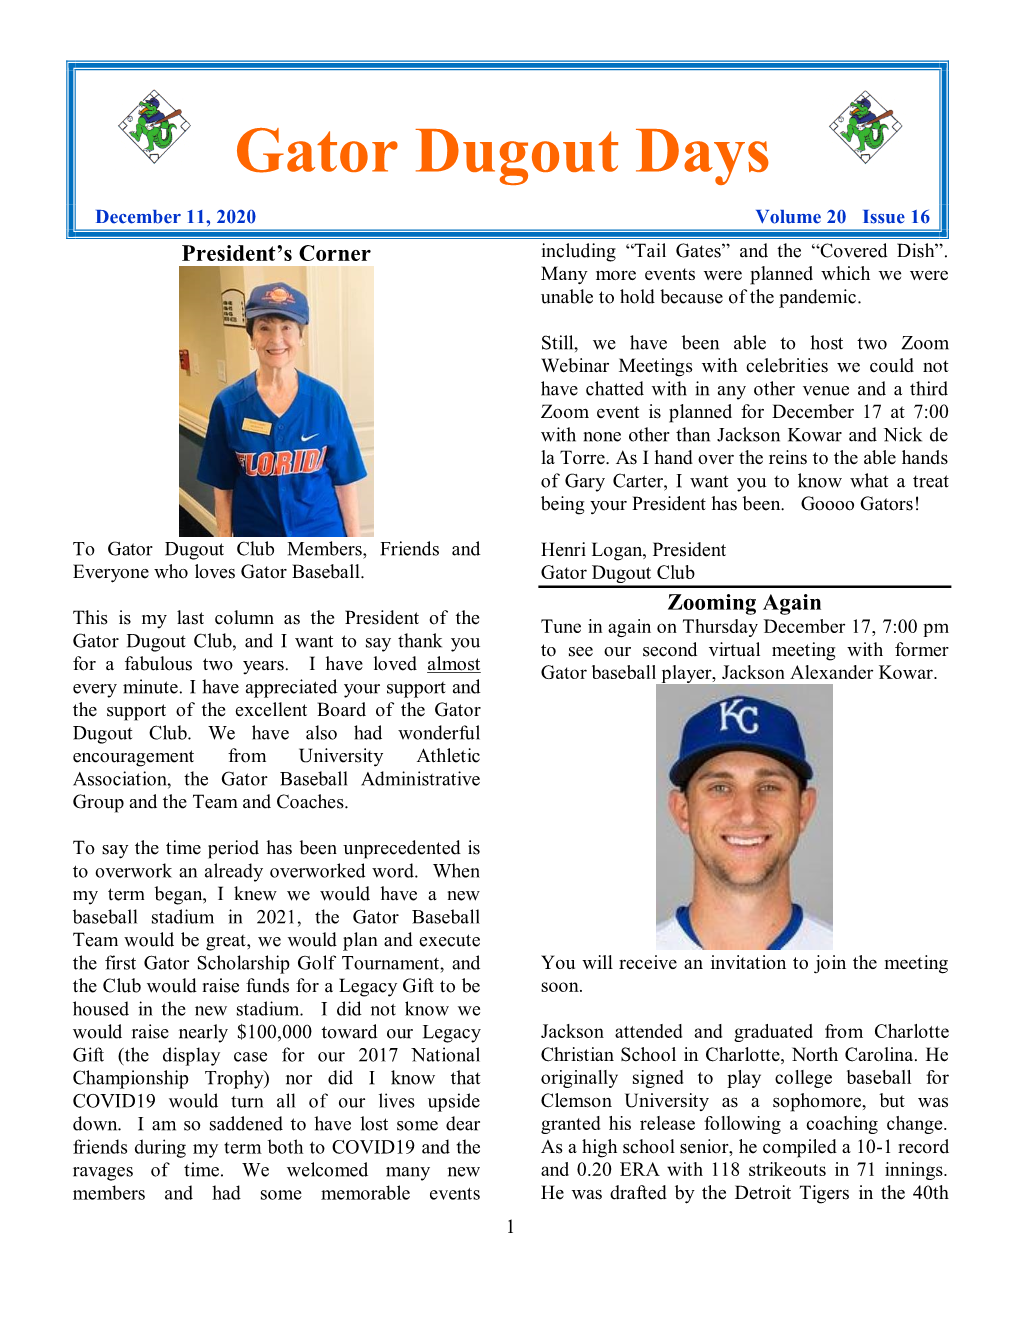 Gator Dugout Days December 11, 2020 Volume 20 Issue 16 President’S Corner Including “Tail Gates” and the “Covered Dish”